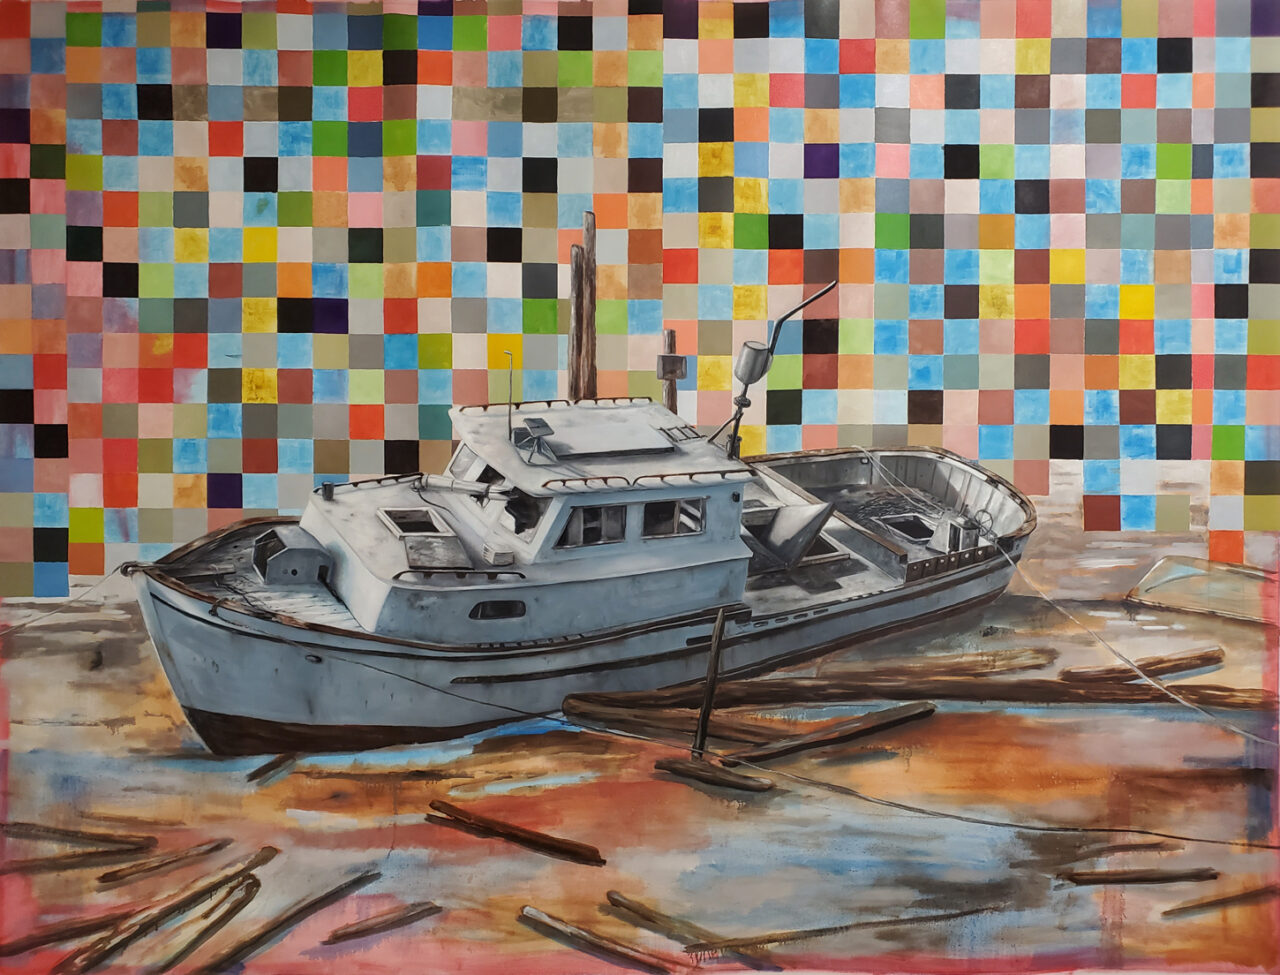 Shipwreck, Breaking of the Vessels, oil on canvas, 180 x 240 cm, 2020